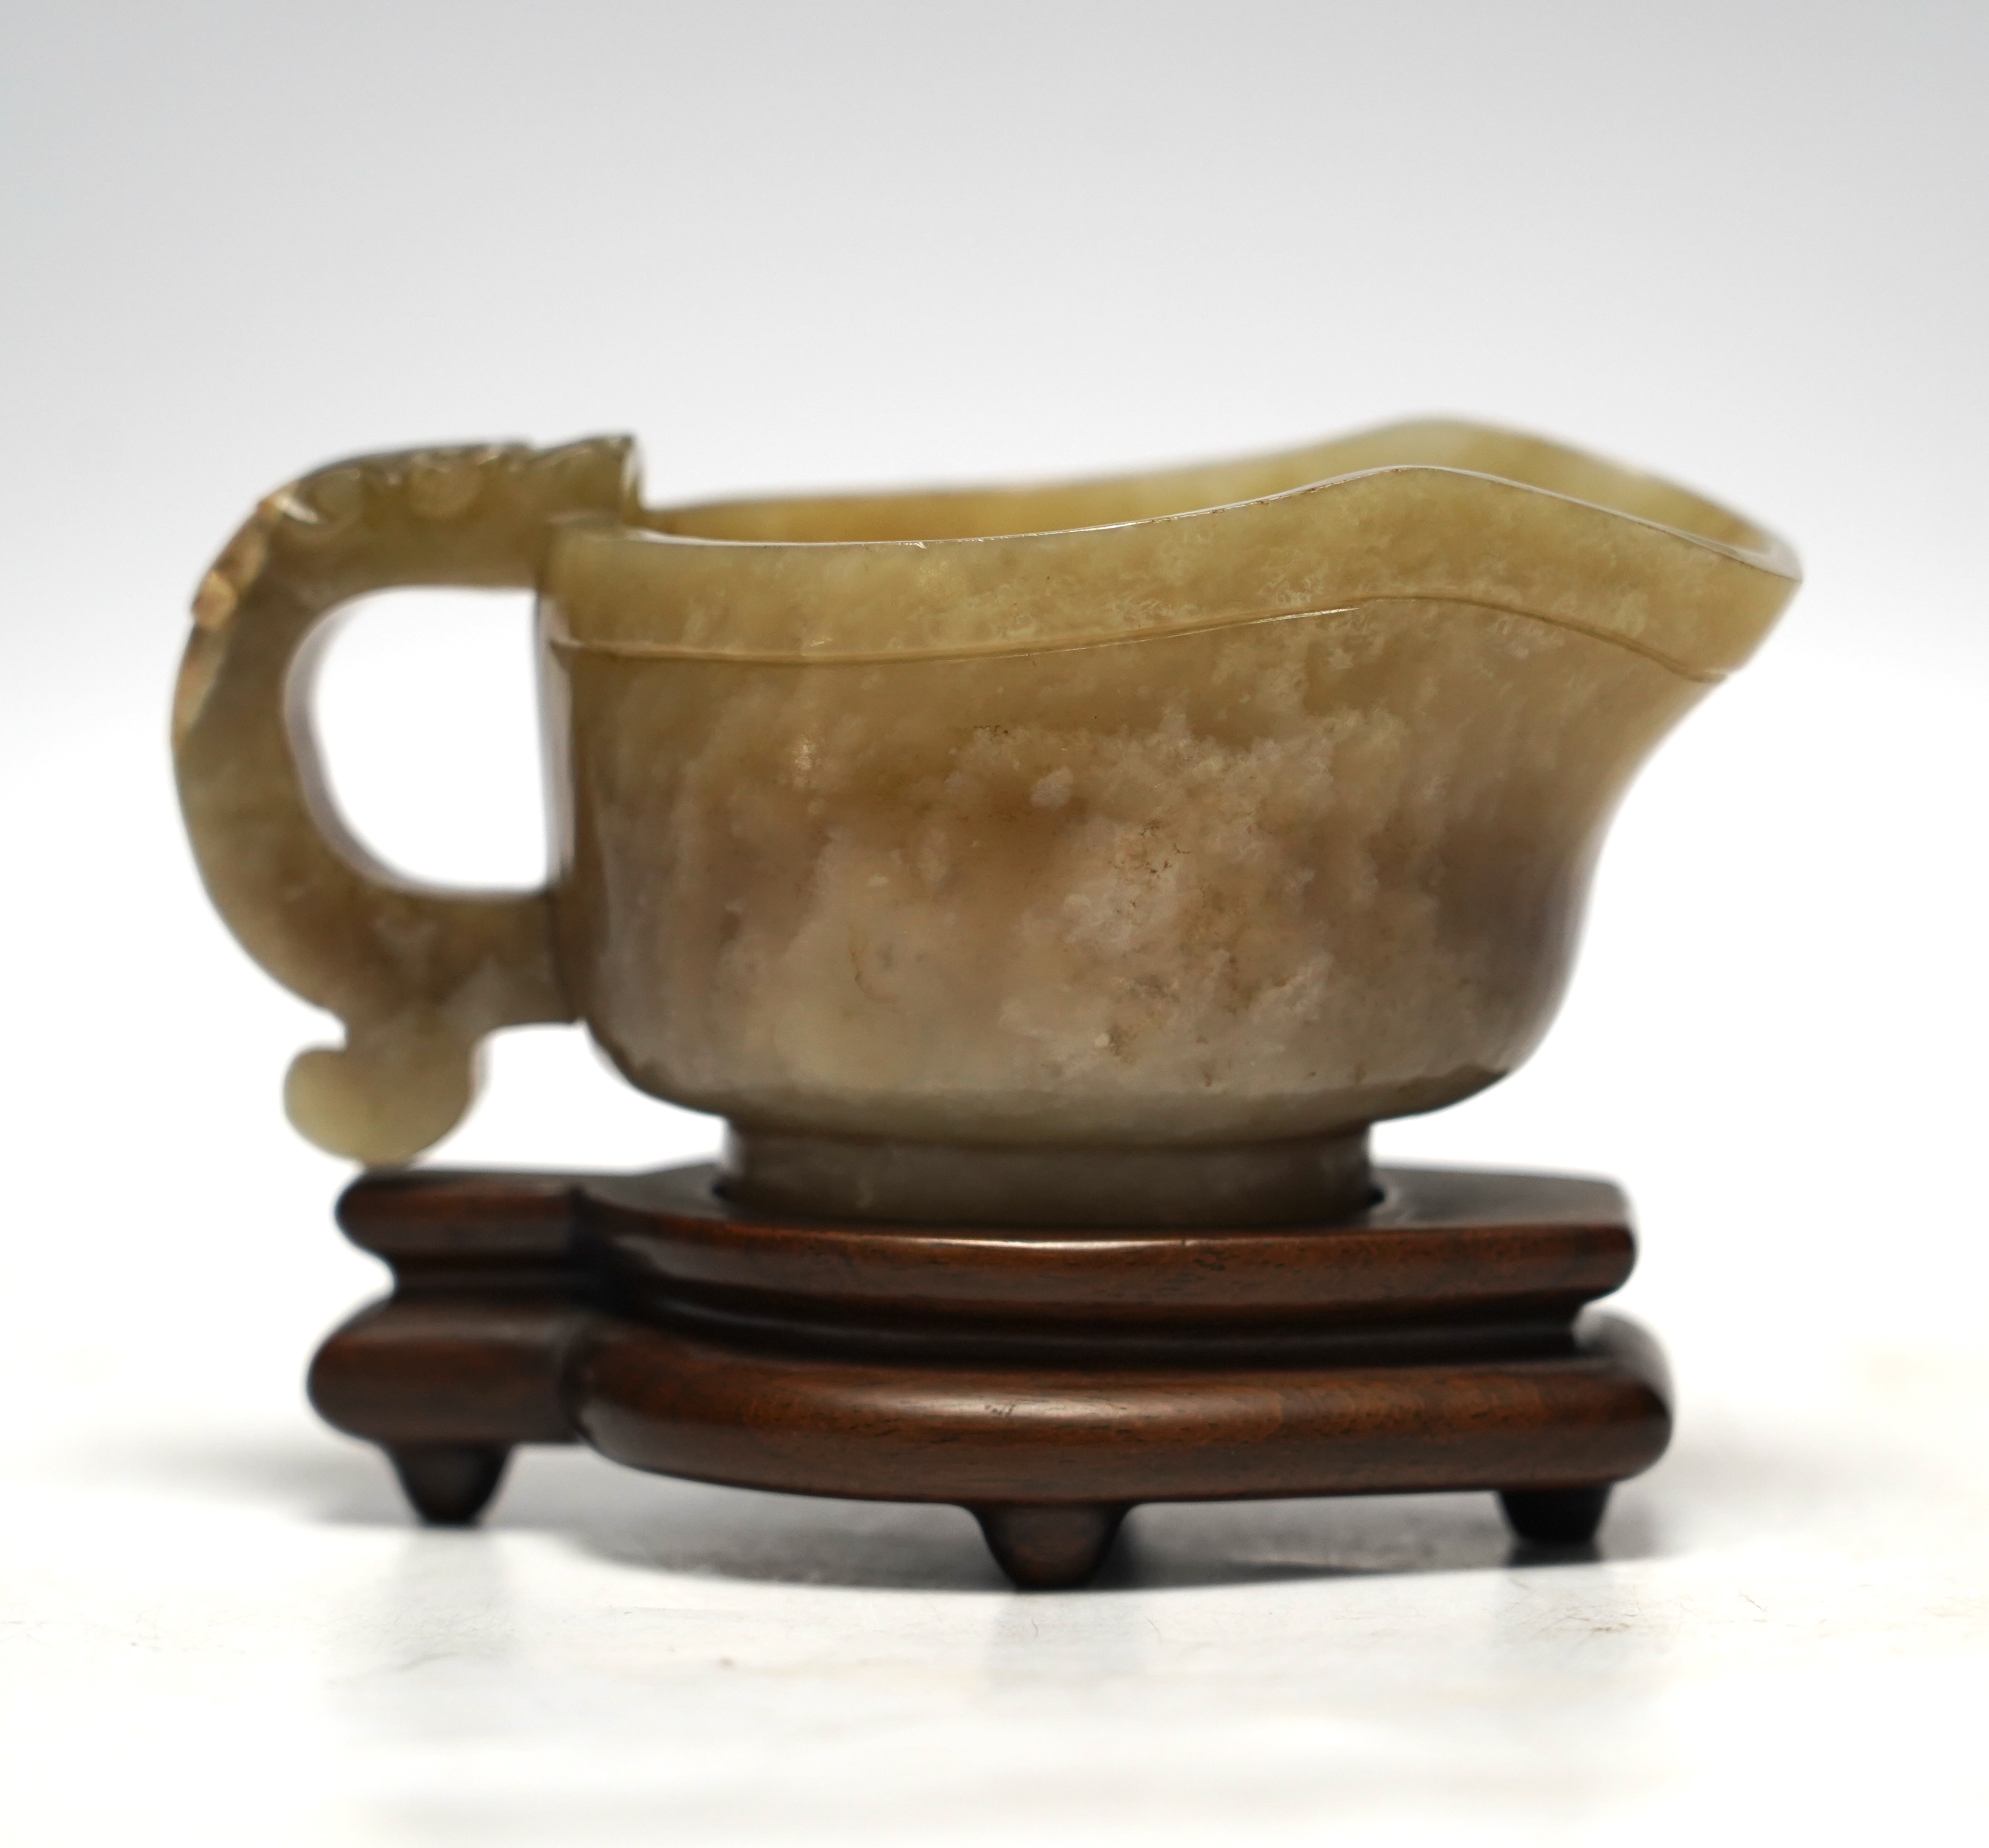 An 18th century Chinese archaistic jade pouring vessel, yi, with carved dragon handle, 6cm high, on a hardwood stand